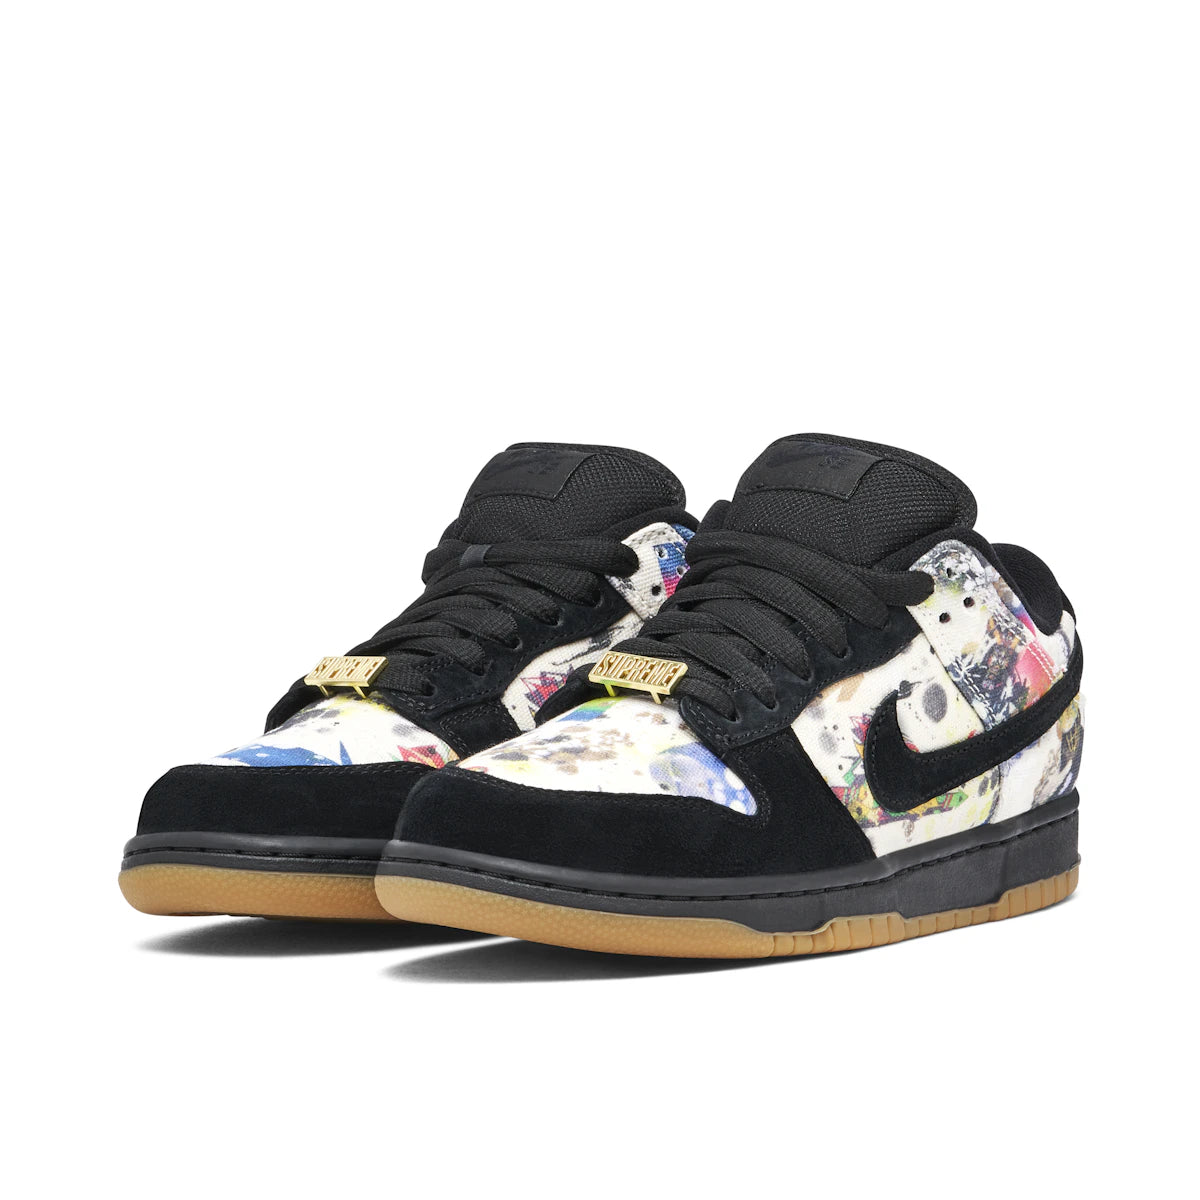 Nike SB Dunk Low Supreme Rammellzee by Nike from £325.00